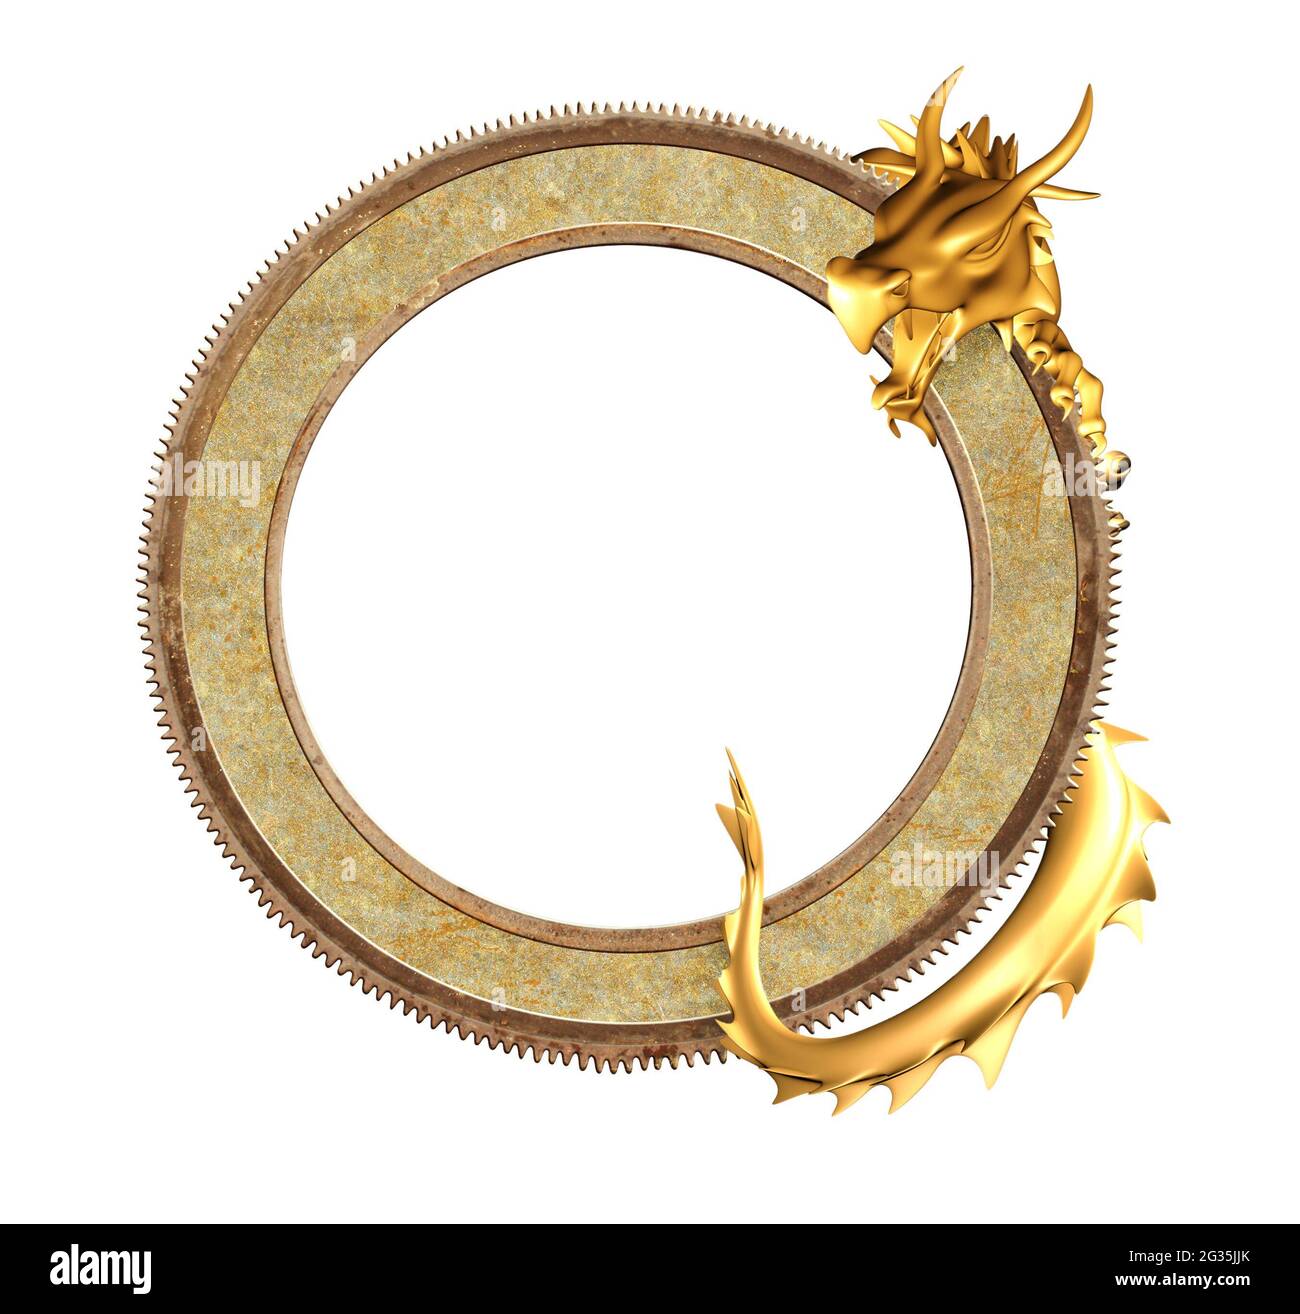 Vintage Information Board With Oriental Dragon Golden Dragon And Round Ancient Metal Frame Object Isolated On White Background Mock Up Template Co Stock Photo Alamy